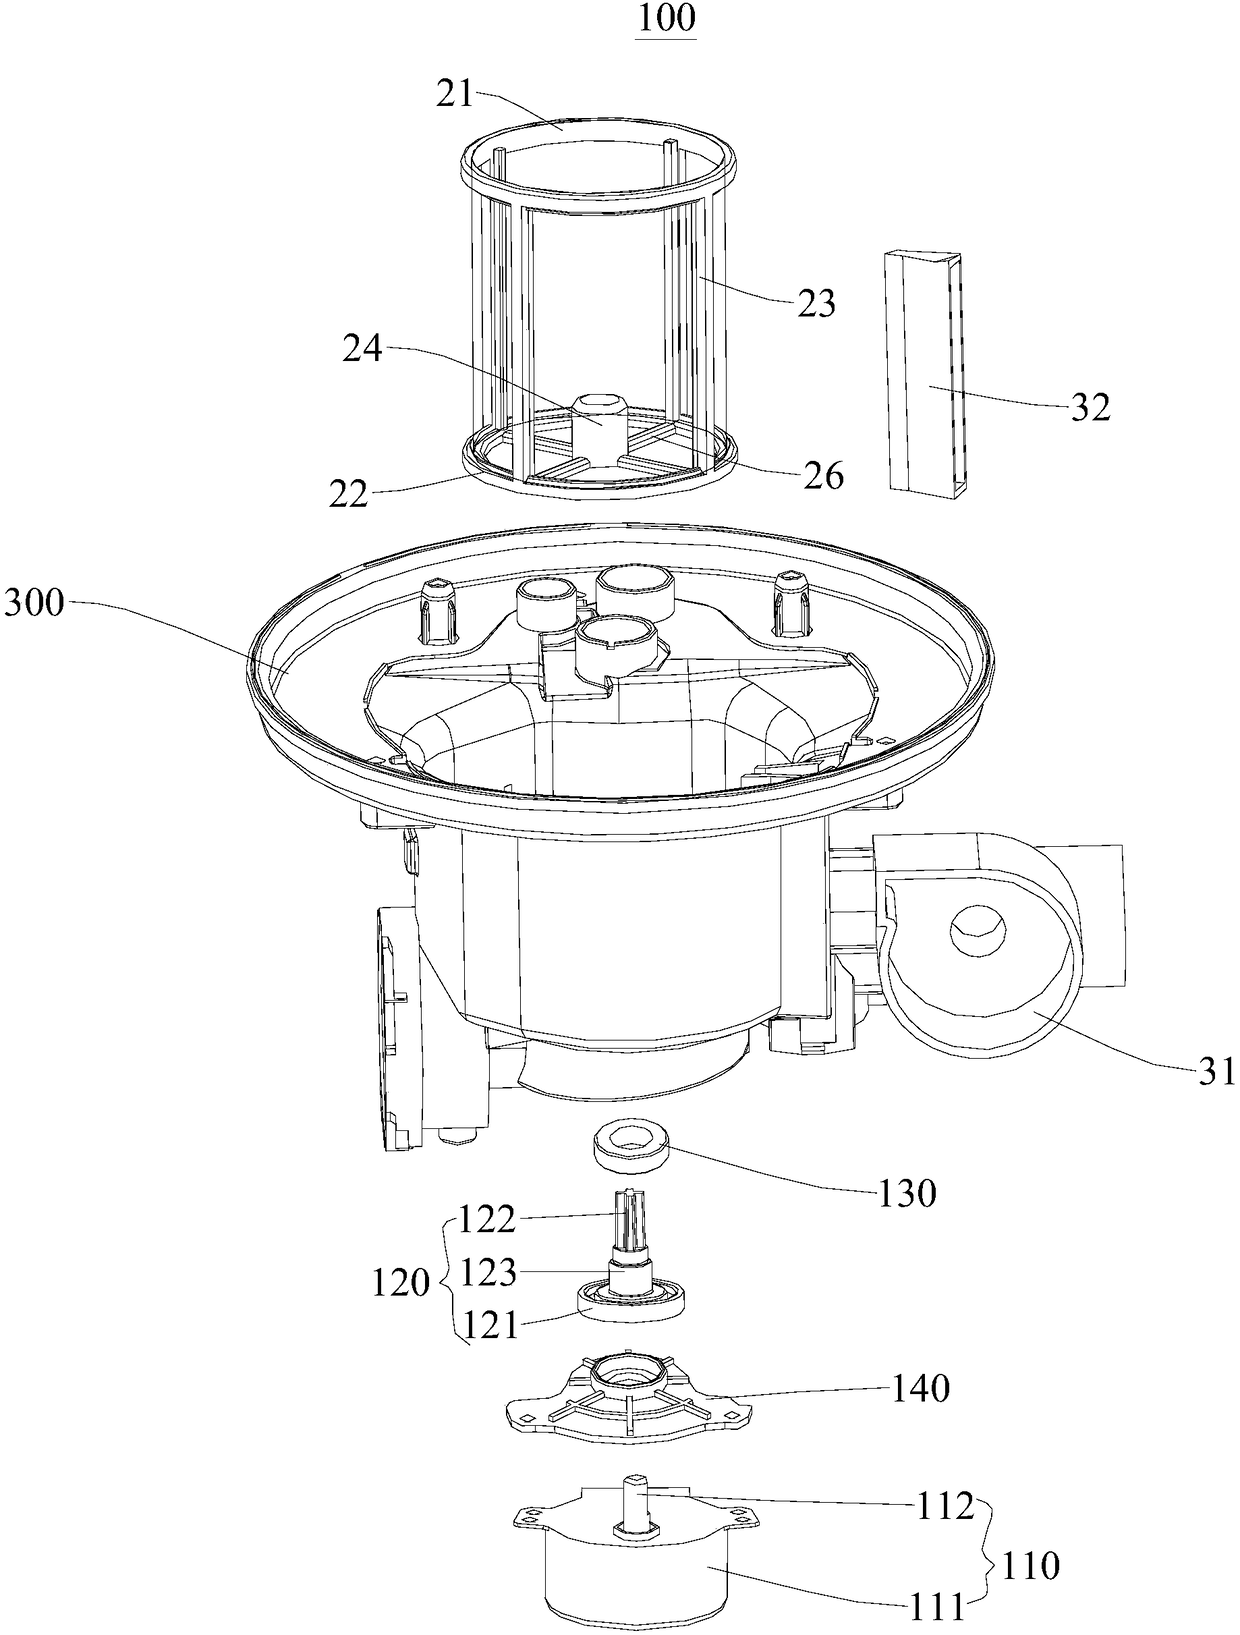 Dish-washing machine and filtering system thereof